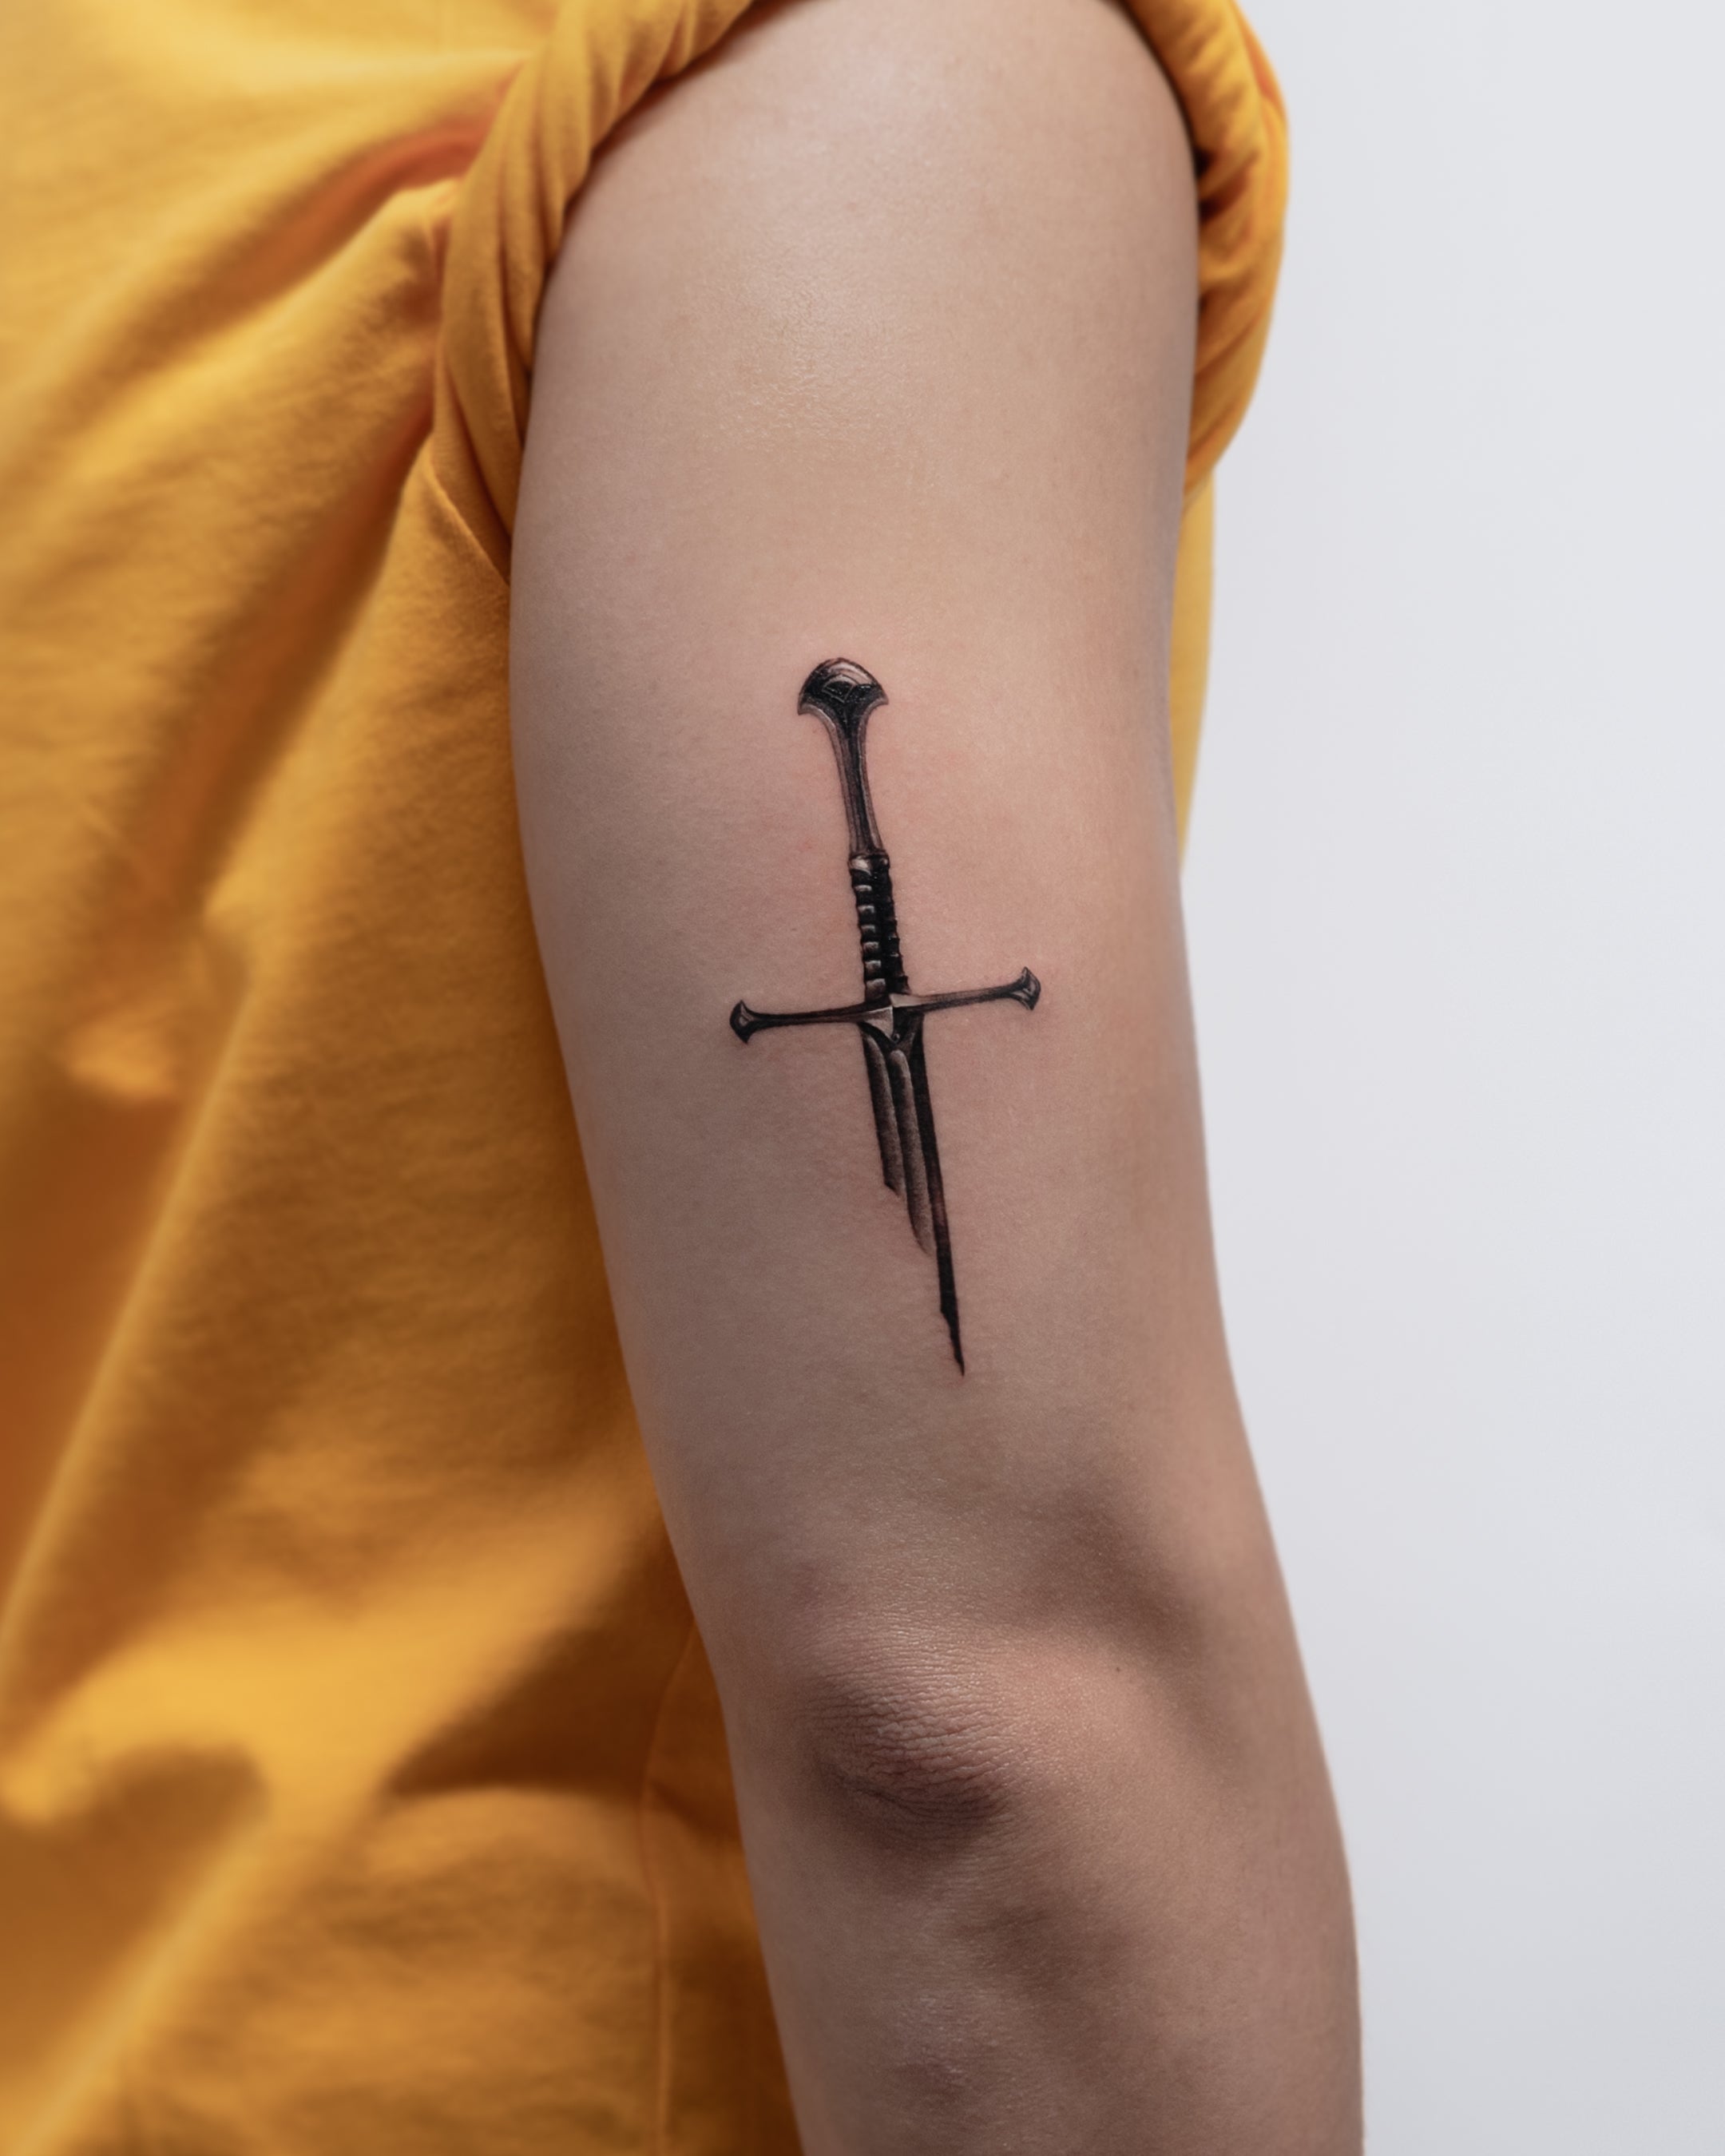 Sword Tattoos  55 Coolest Designs For Men  Women With Symbolism